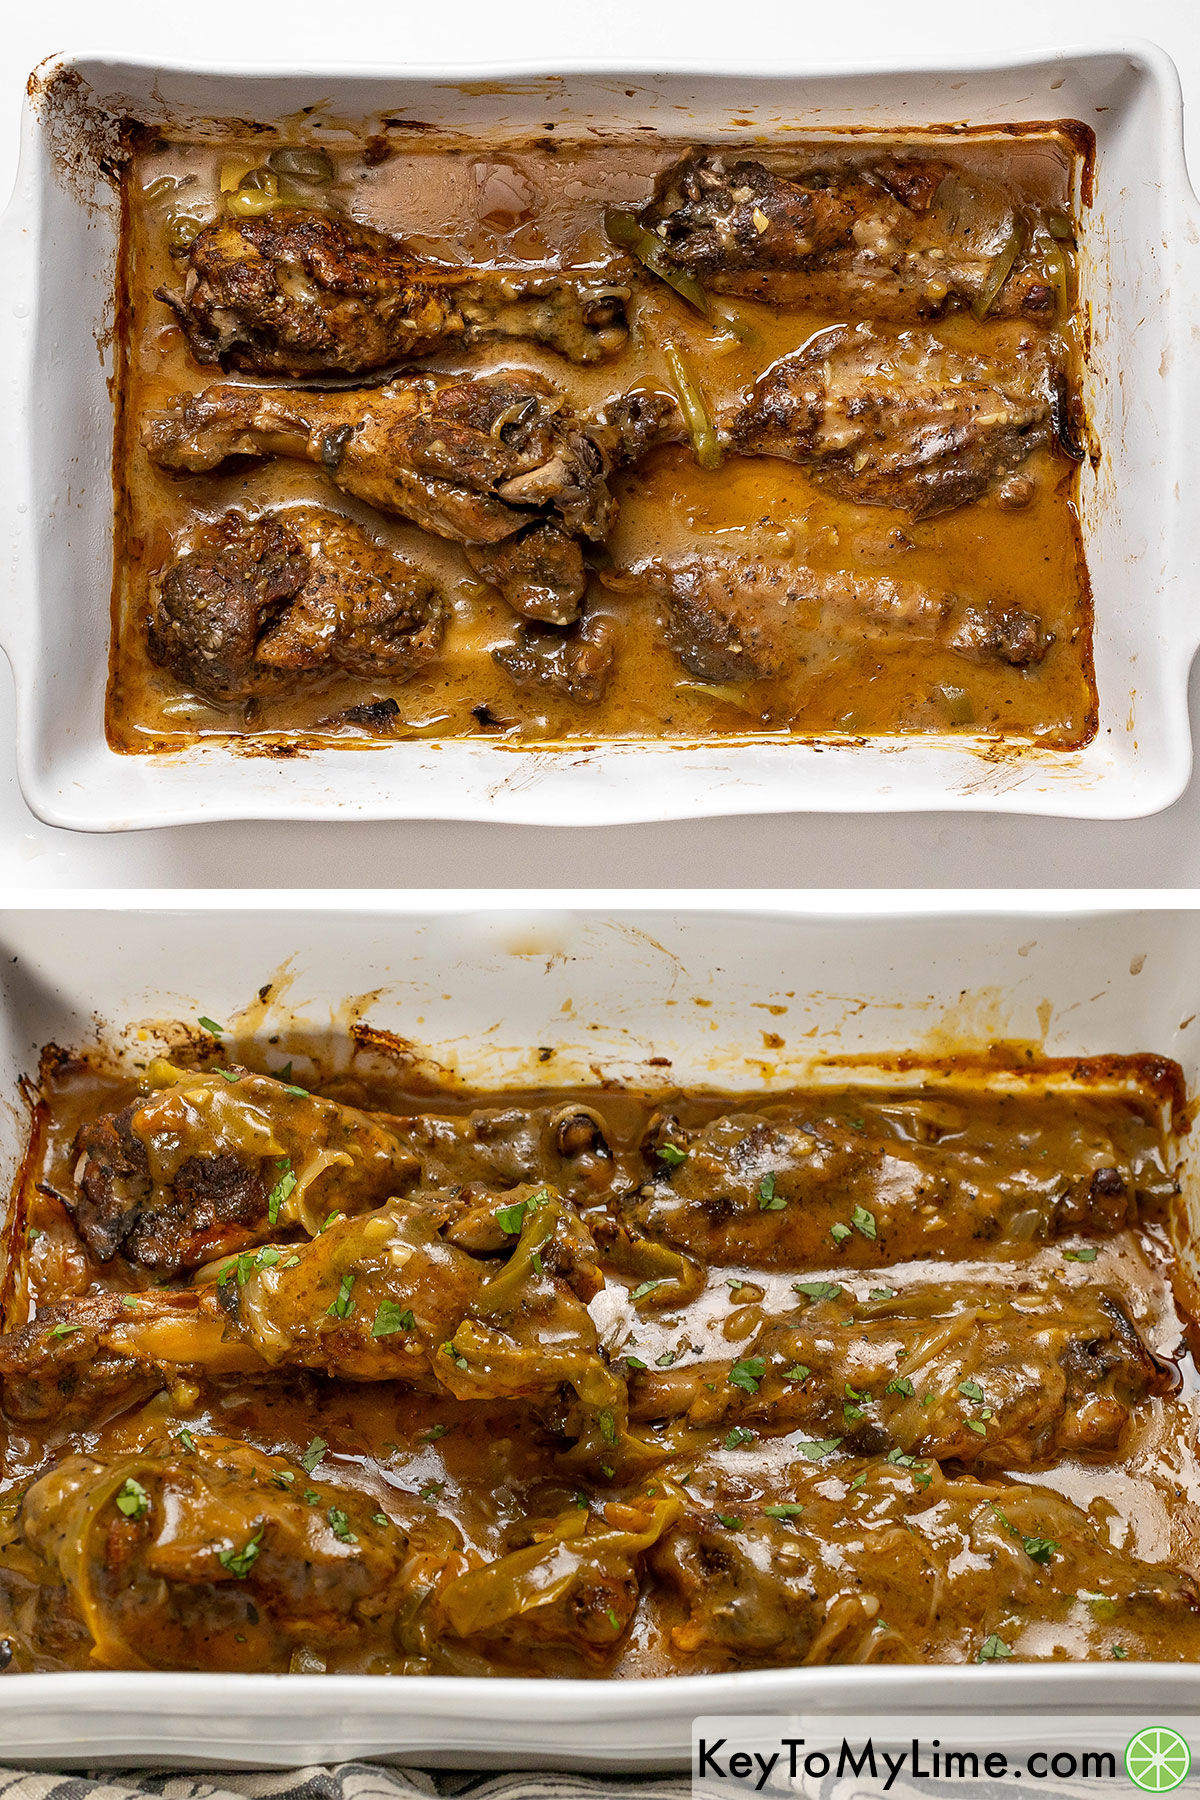 Spooning gravy over the cooked turkey wings, and then garnishing with fresh parsley.